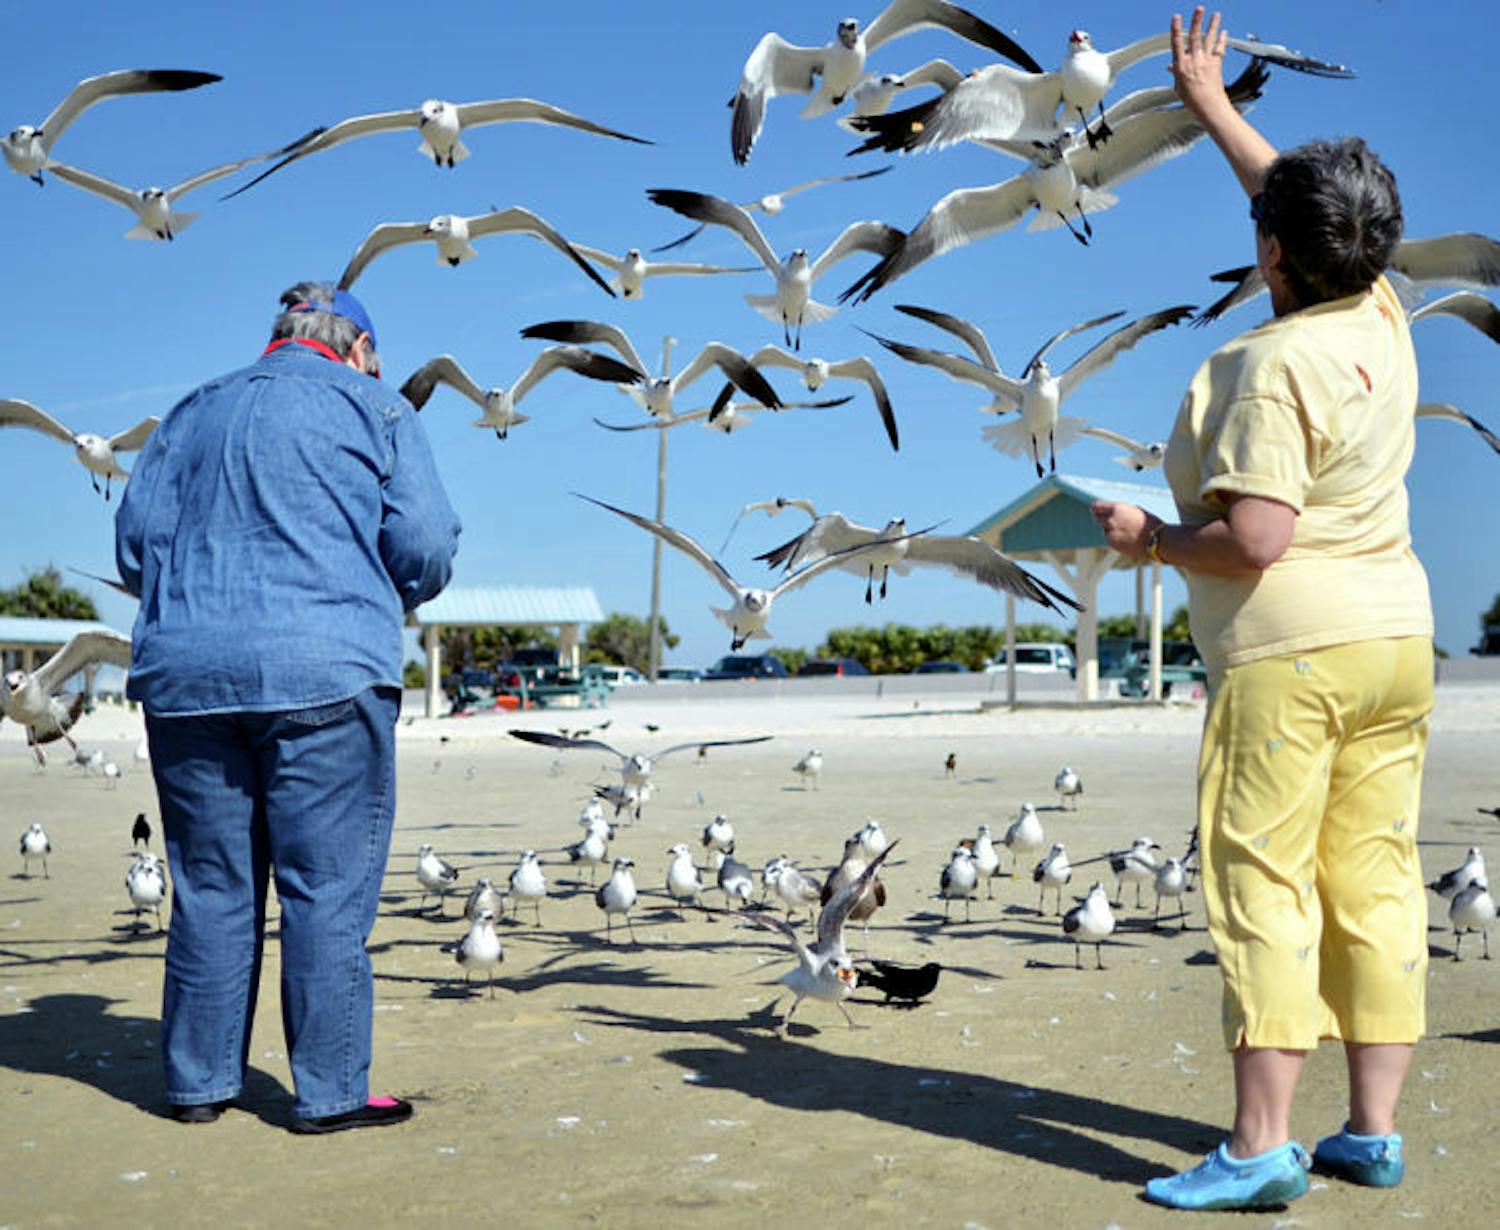 Grimes, left, and Petersen, right, feed crackers to the birds surrounding them.